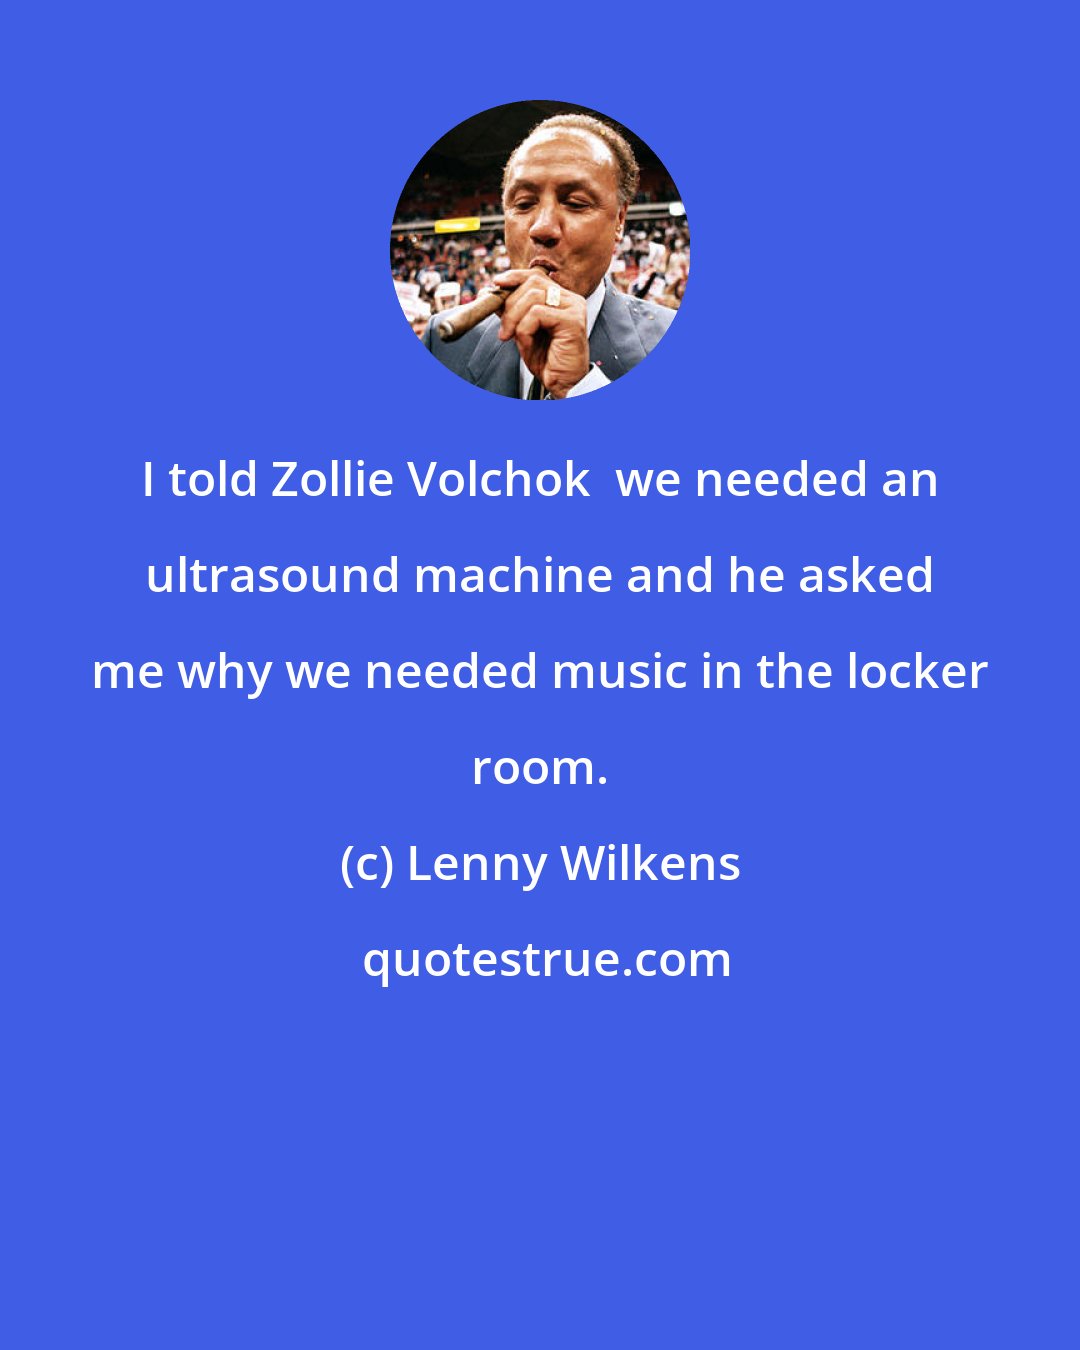 Lenny Wilkens: I told Zollie Volchok  we needed an ultrasound machine and he asked me why we needed music in the locker room.